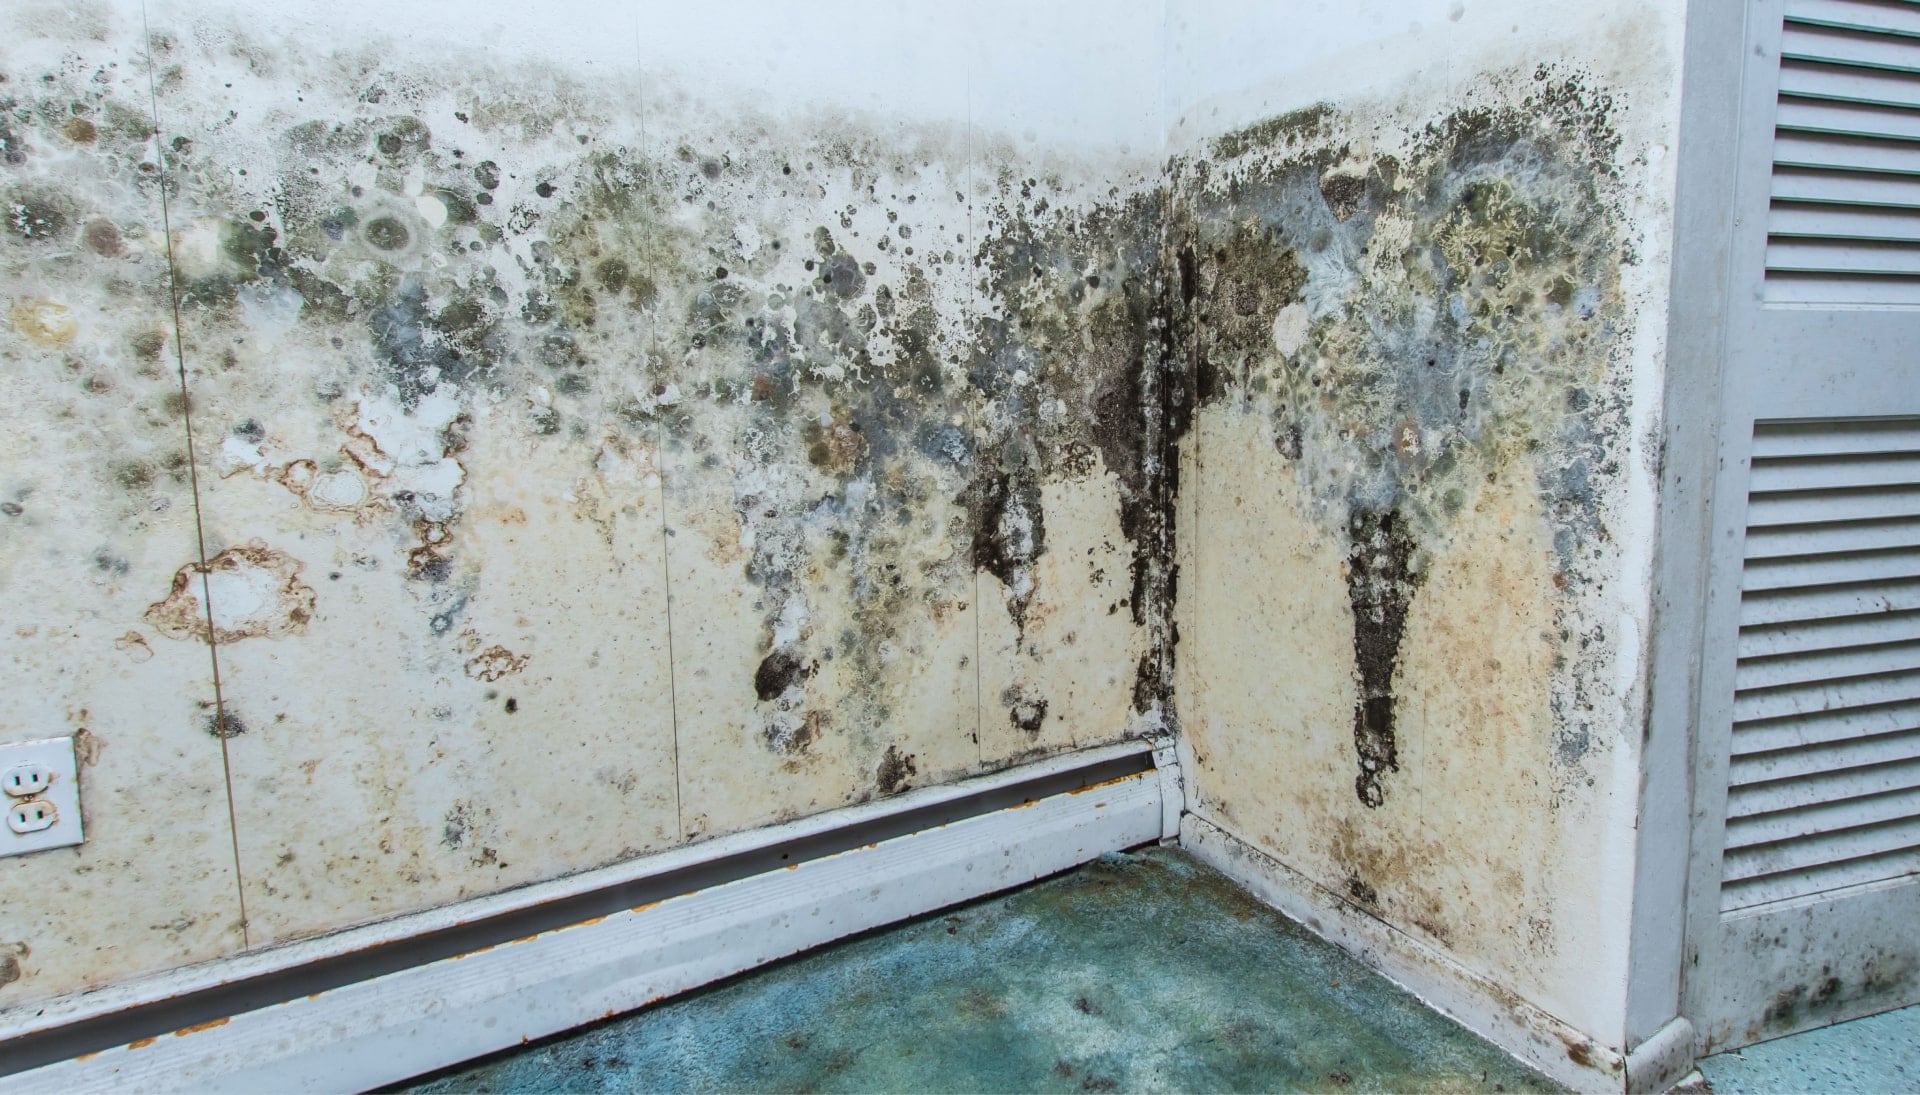 Professional mold removal, odor control, and water damage restoration service in Alexandria, Virginia.